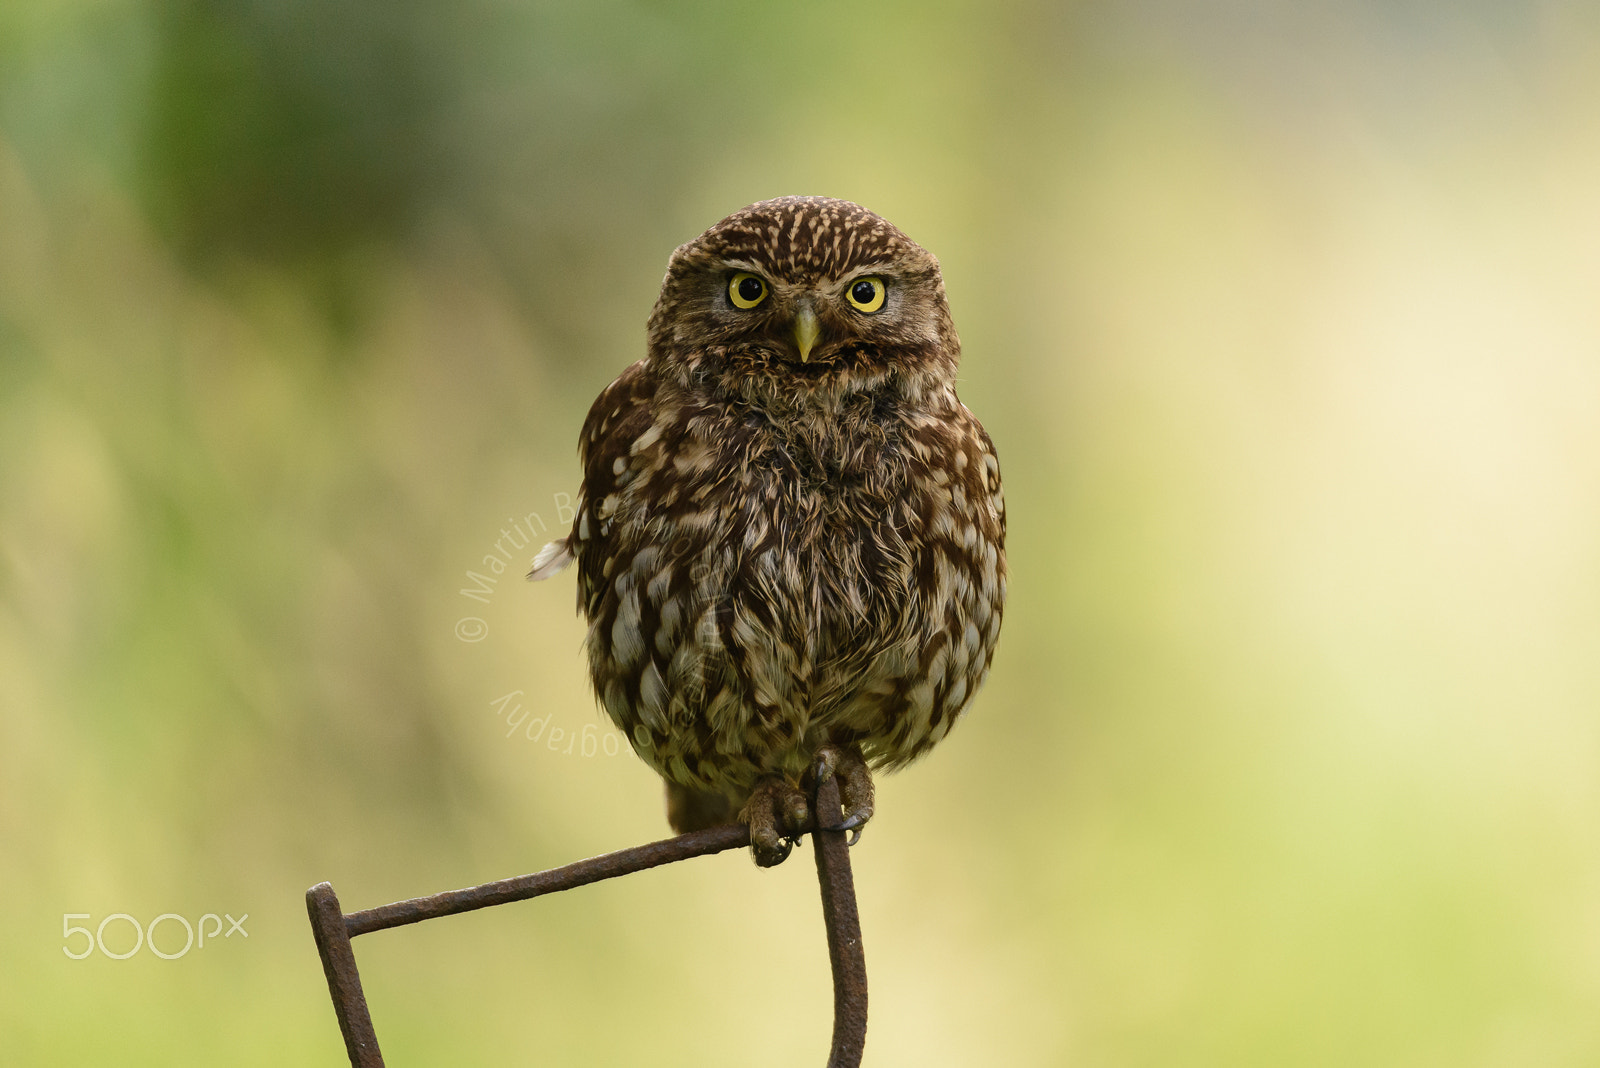 Nikon D610 + Sigma 150-600mm F5-6.3 DG OS HSM | S sample photo. Steenuil - little owl photography